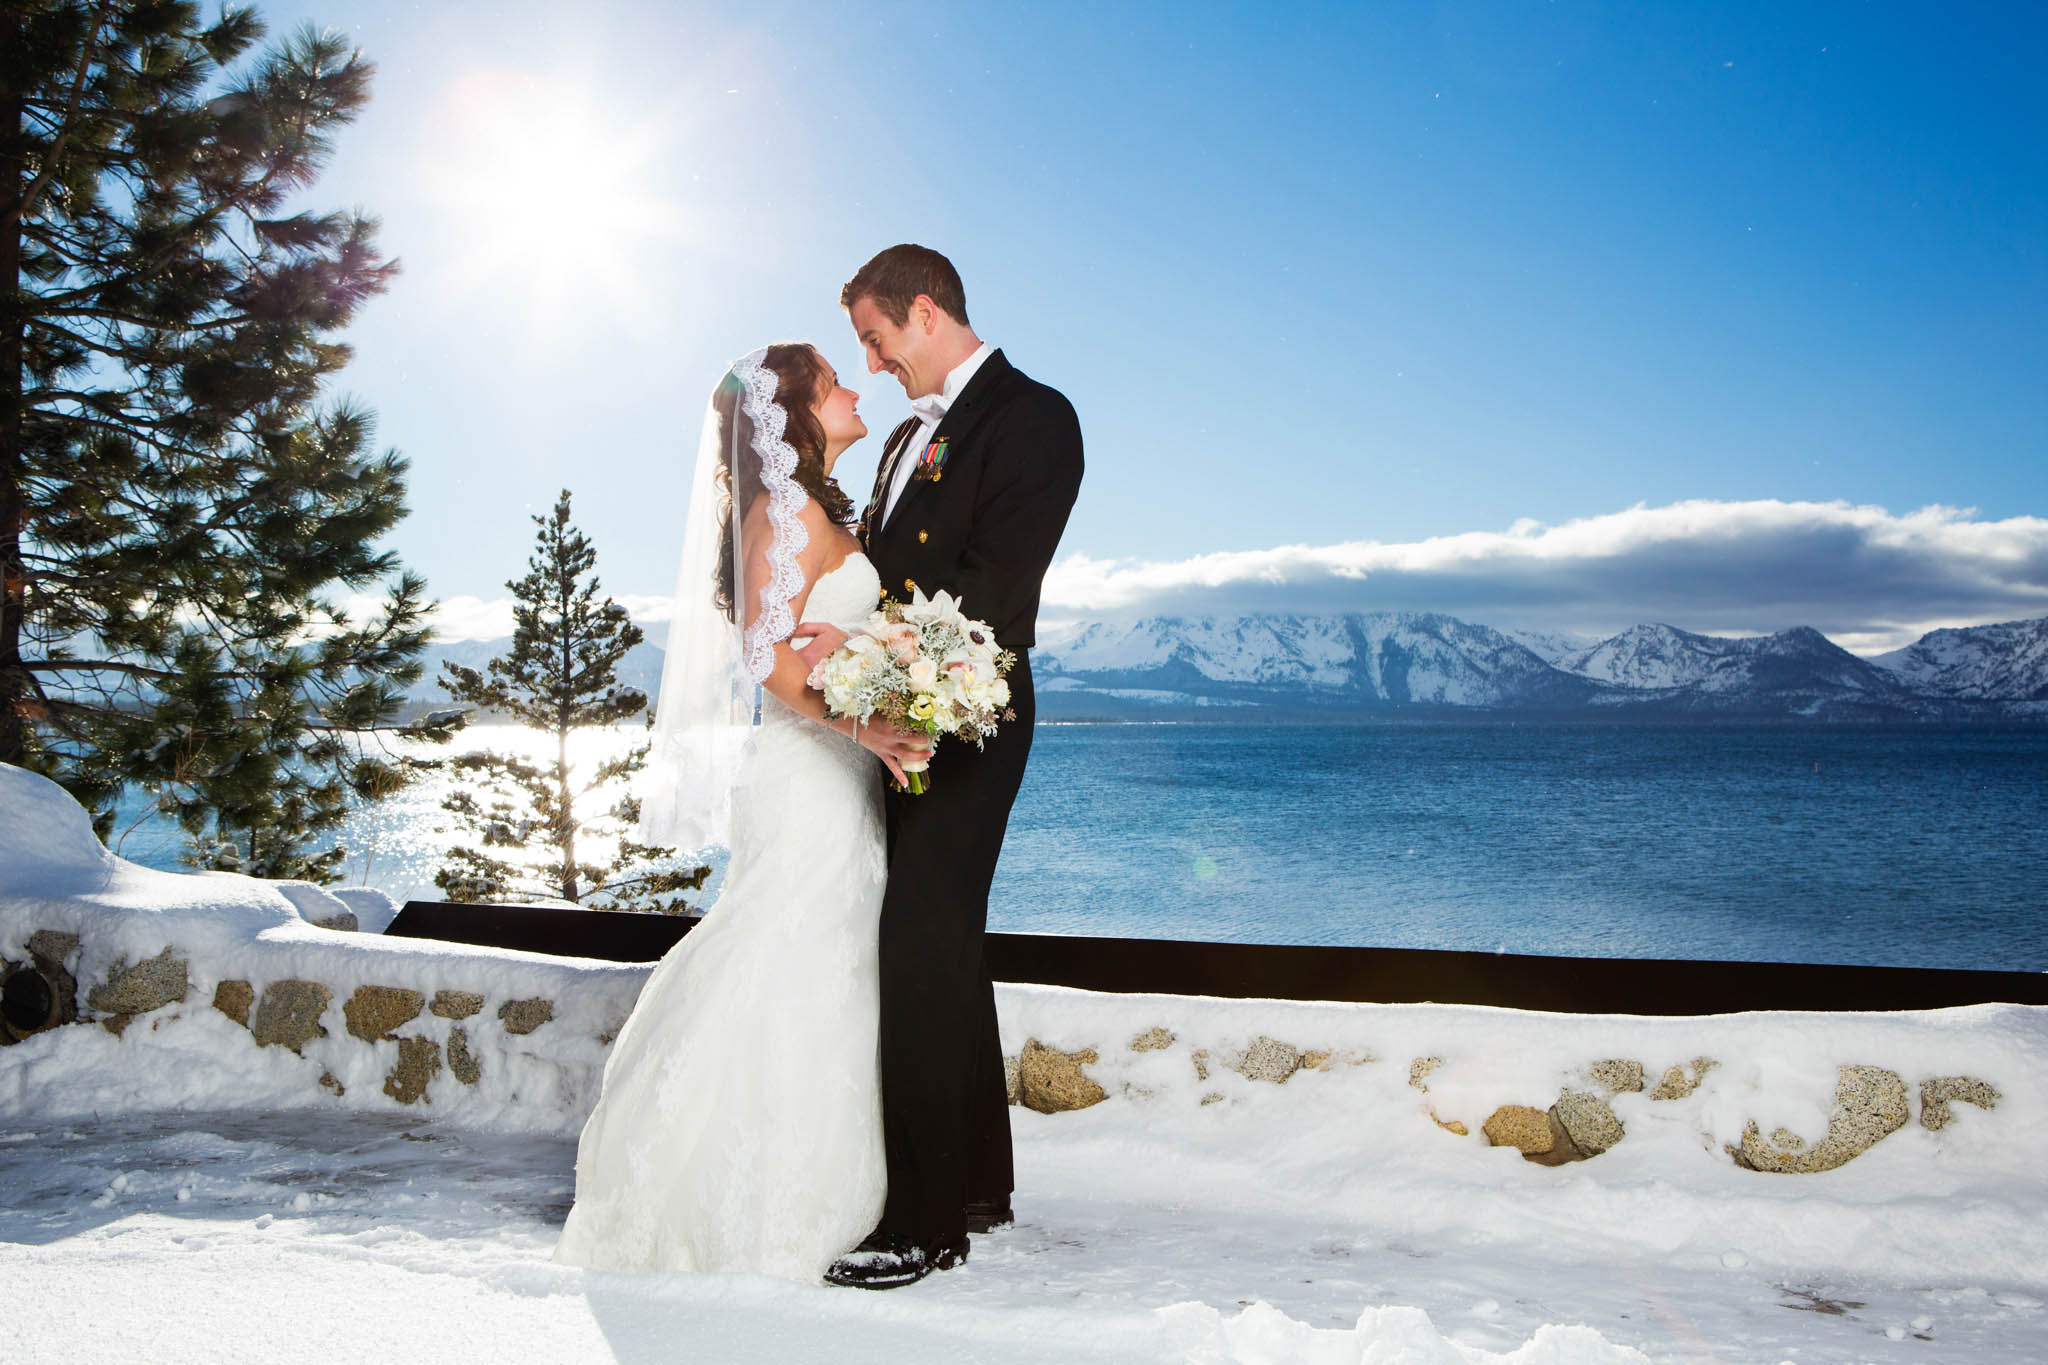 bride and groom portrait looking at each other, uniform, lake view, snow, white bouquet, lace, veil